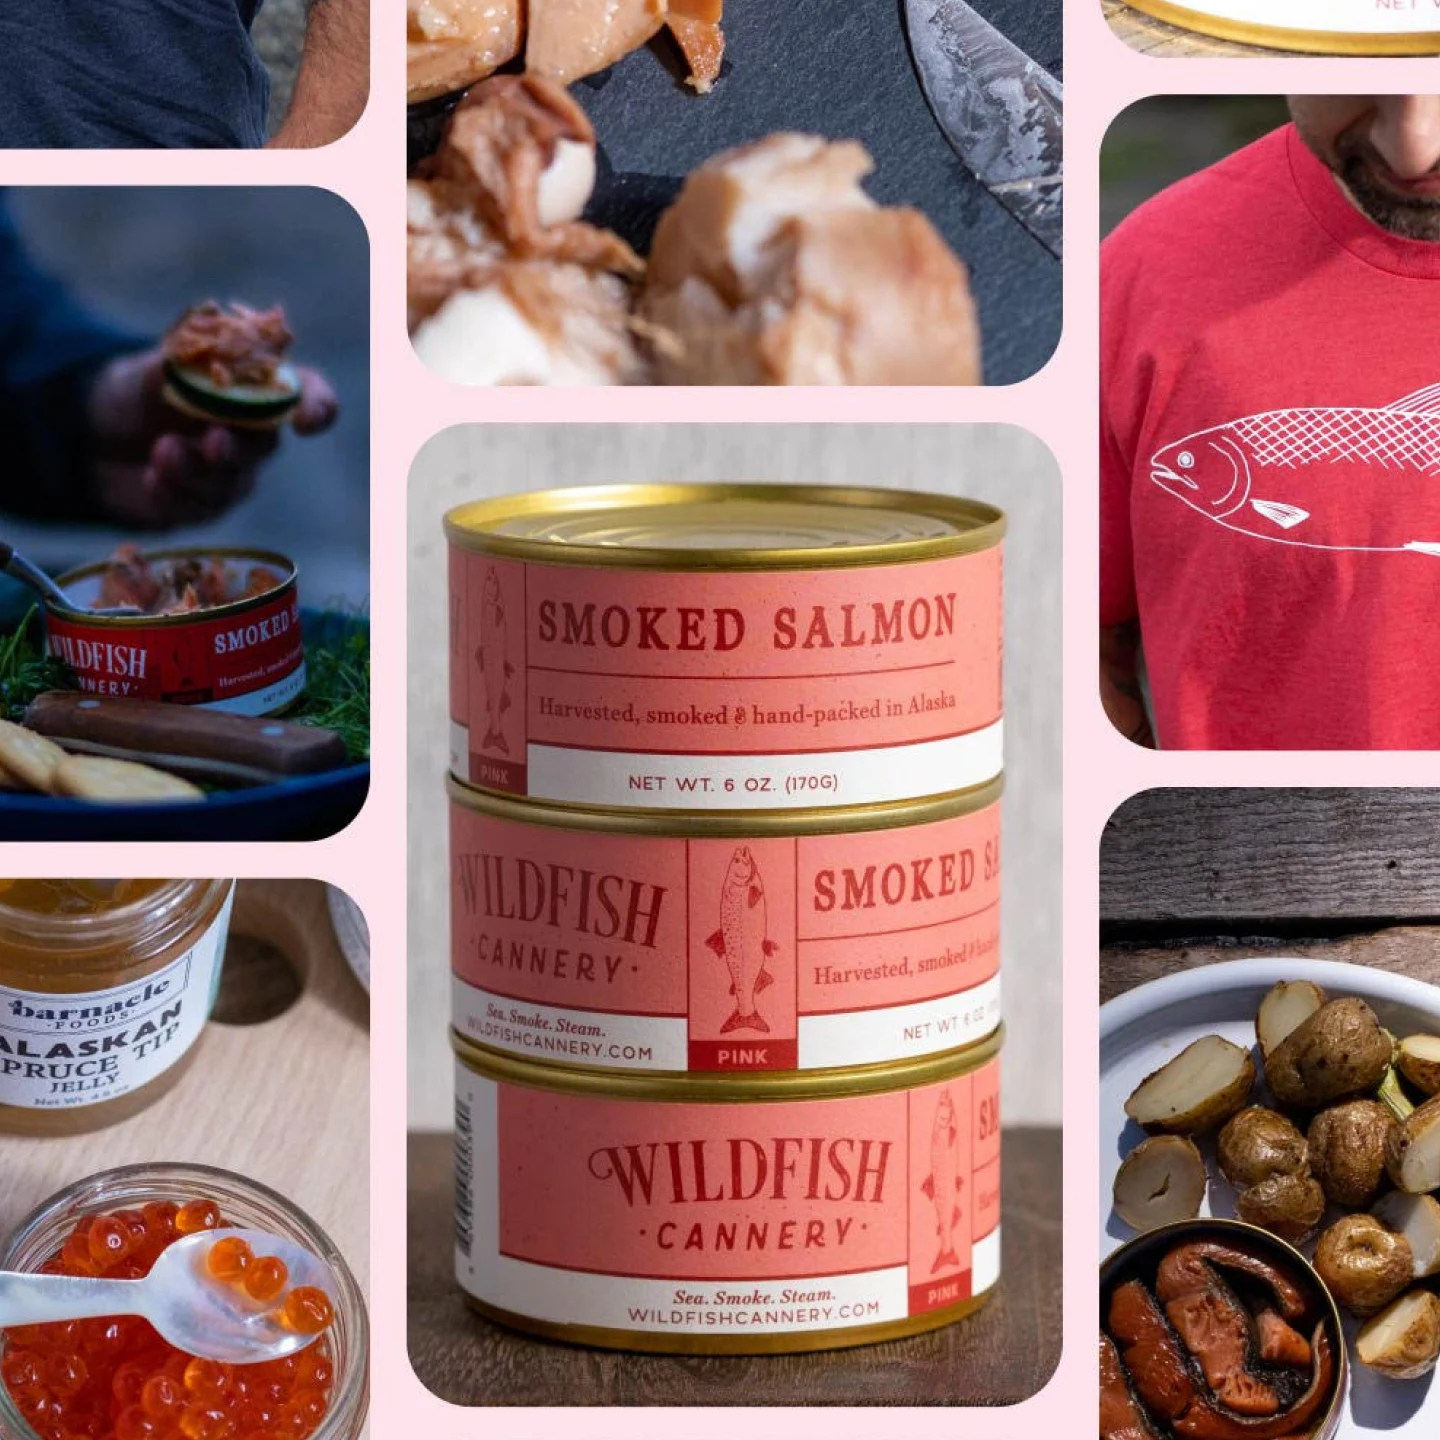 Stacked pink cans of Wildfish Cannery smoked salmon. Hand holds salmon and a cucumber slice on a cracker. An open can of smoked salmon. Salmon and caviar pieces on a table. Plate with roasted potatoes. White man wears a red t-shirt with a fish drawing.